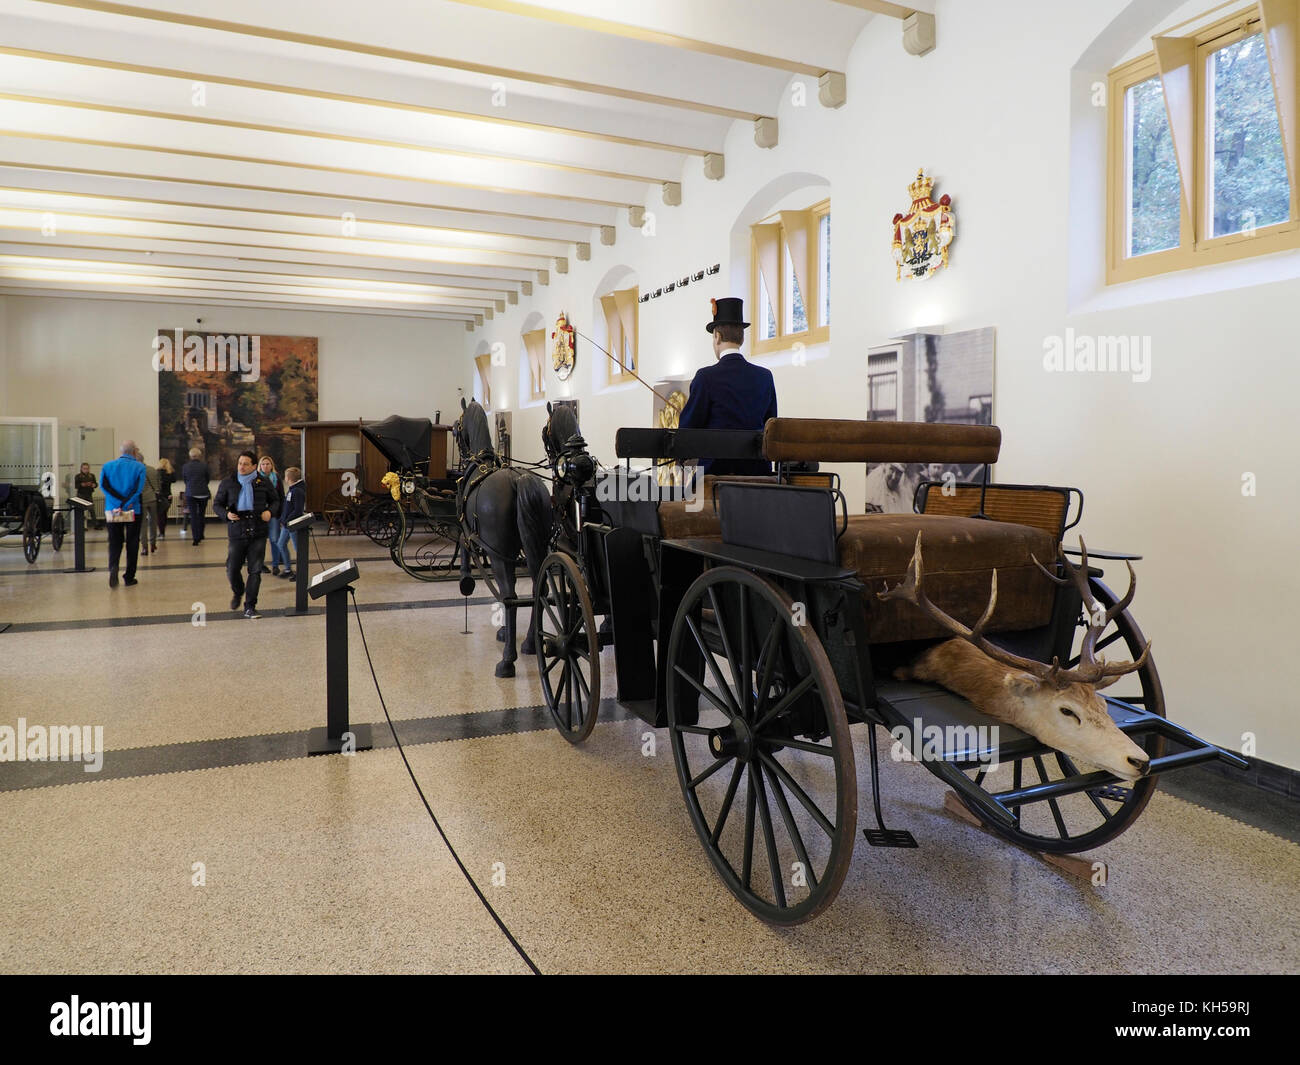 Carriages of the Dutch Royal Family on display in the stables of the het Loo Palace in Apeldoorn, Gelderland, the Netherlands Stock Photo